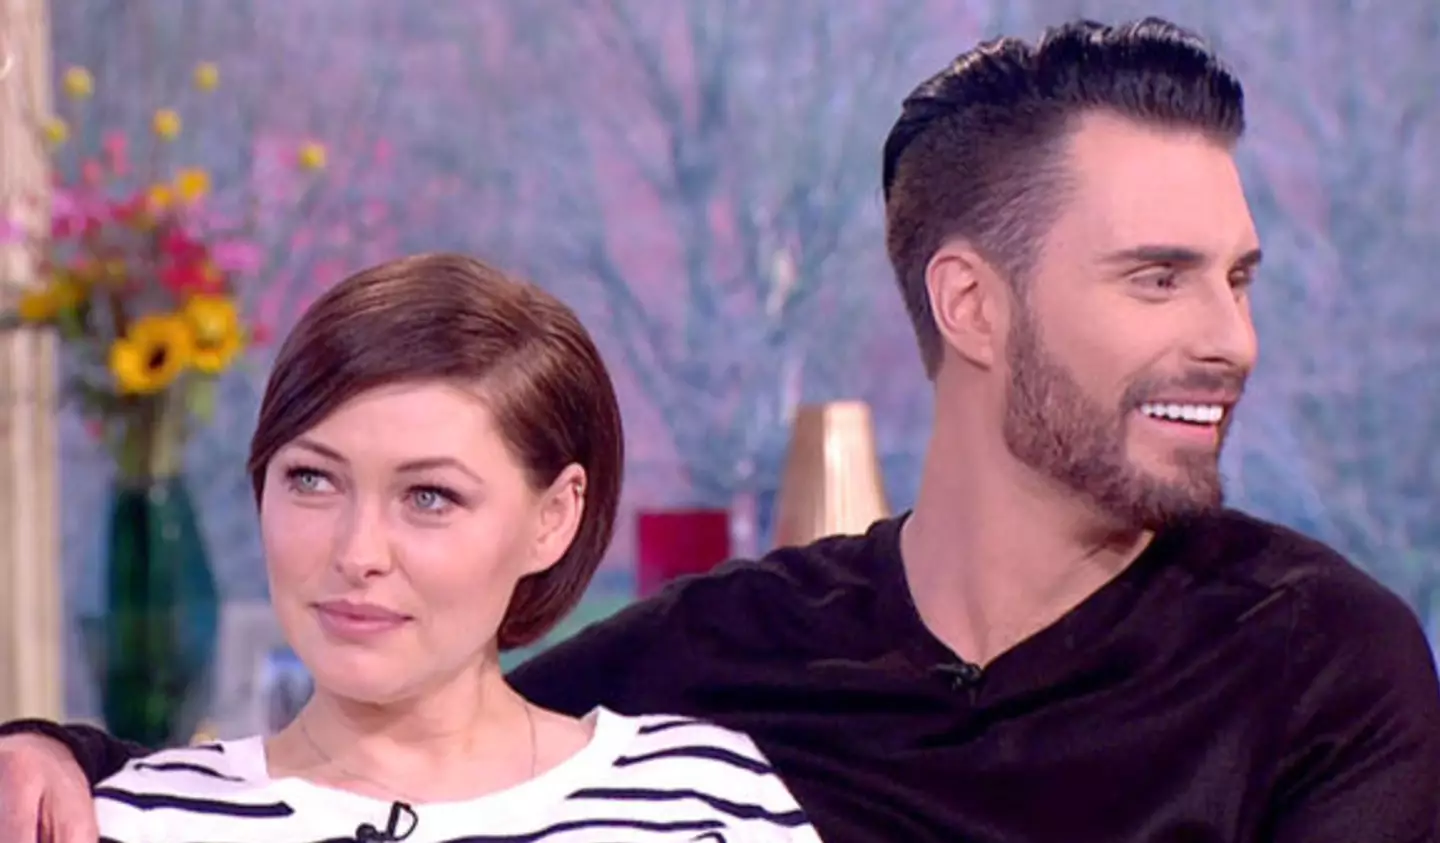 Rylan Clark and Emma Willis will be hosting This Morning 'all next week'.